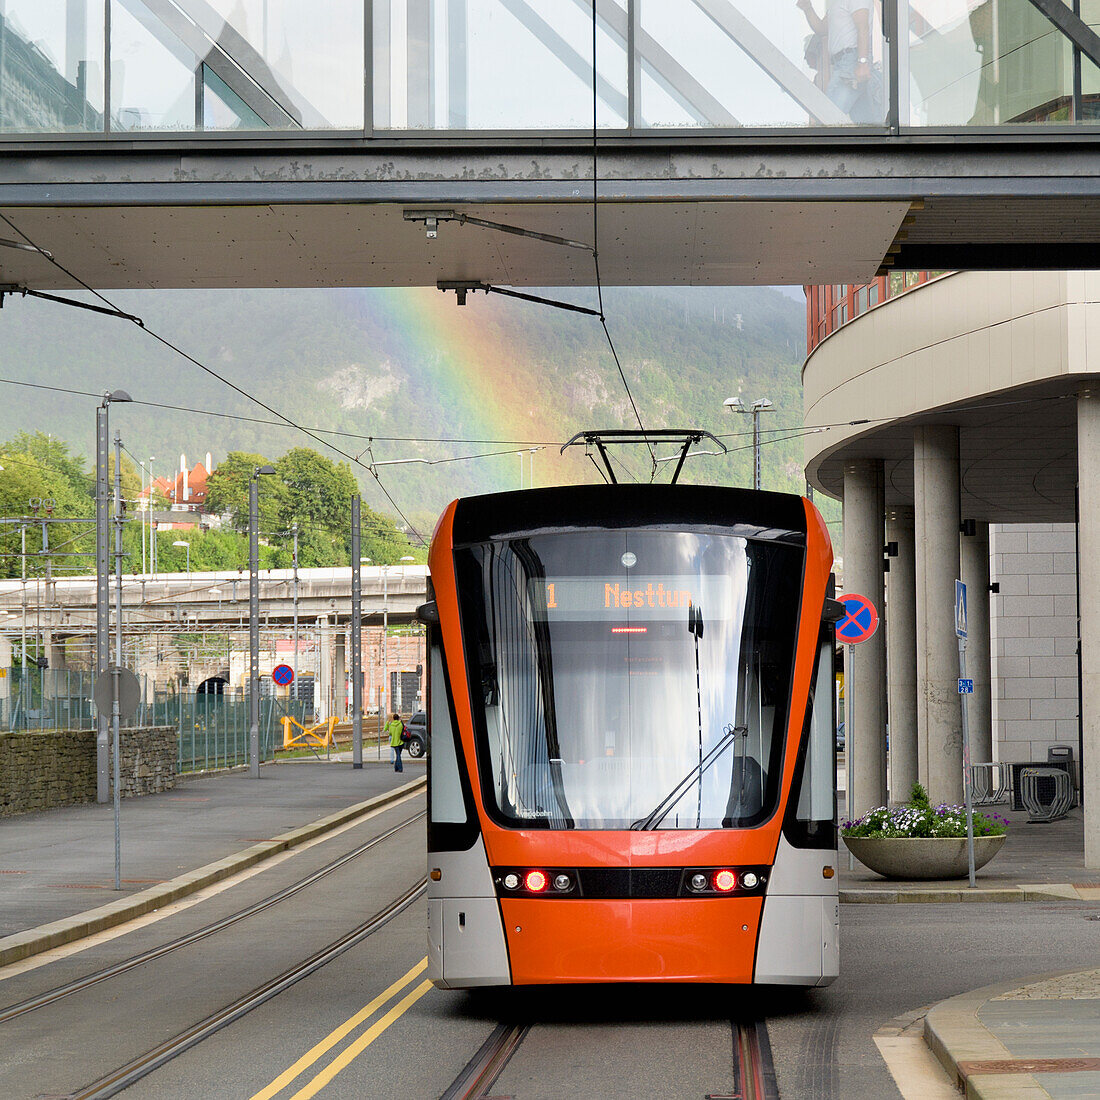 Public Transportation Train On A City Street With A Walkway Overhead And A Rainbow In The Background; Bergen Norway